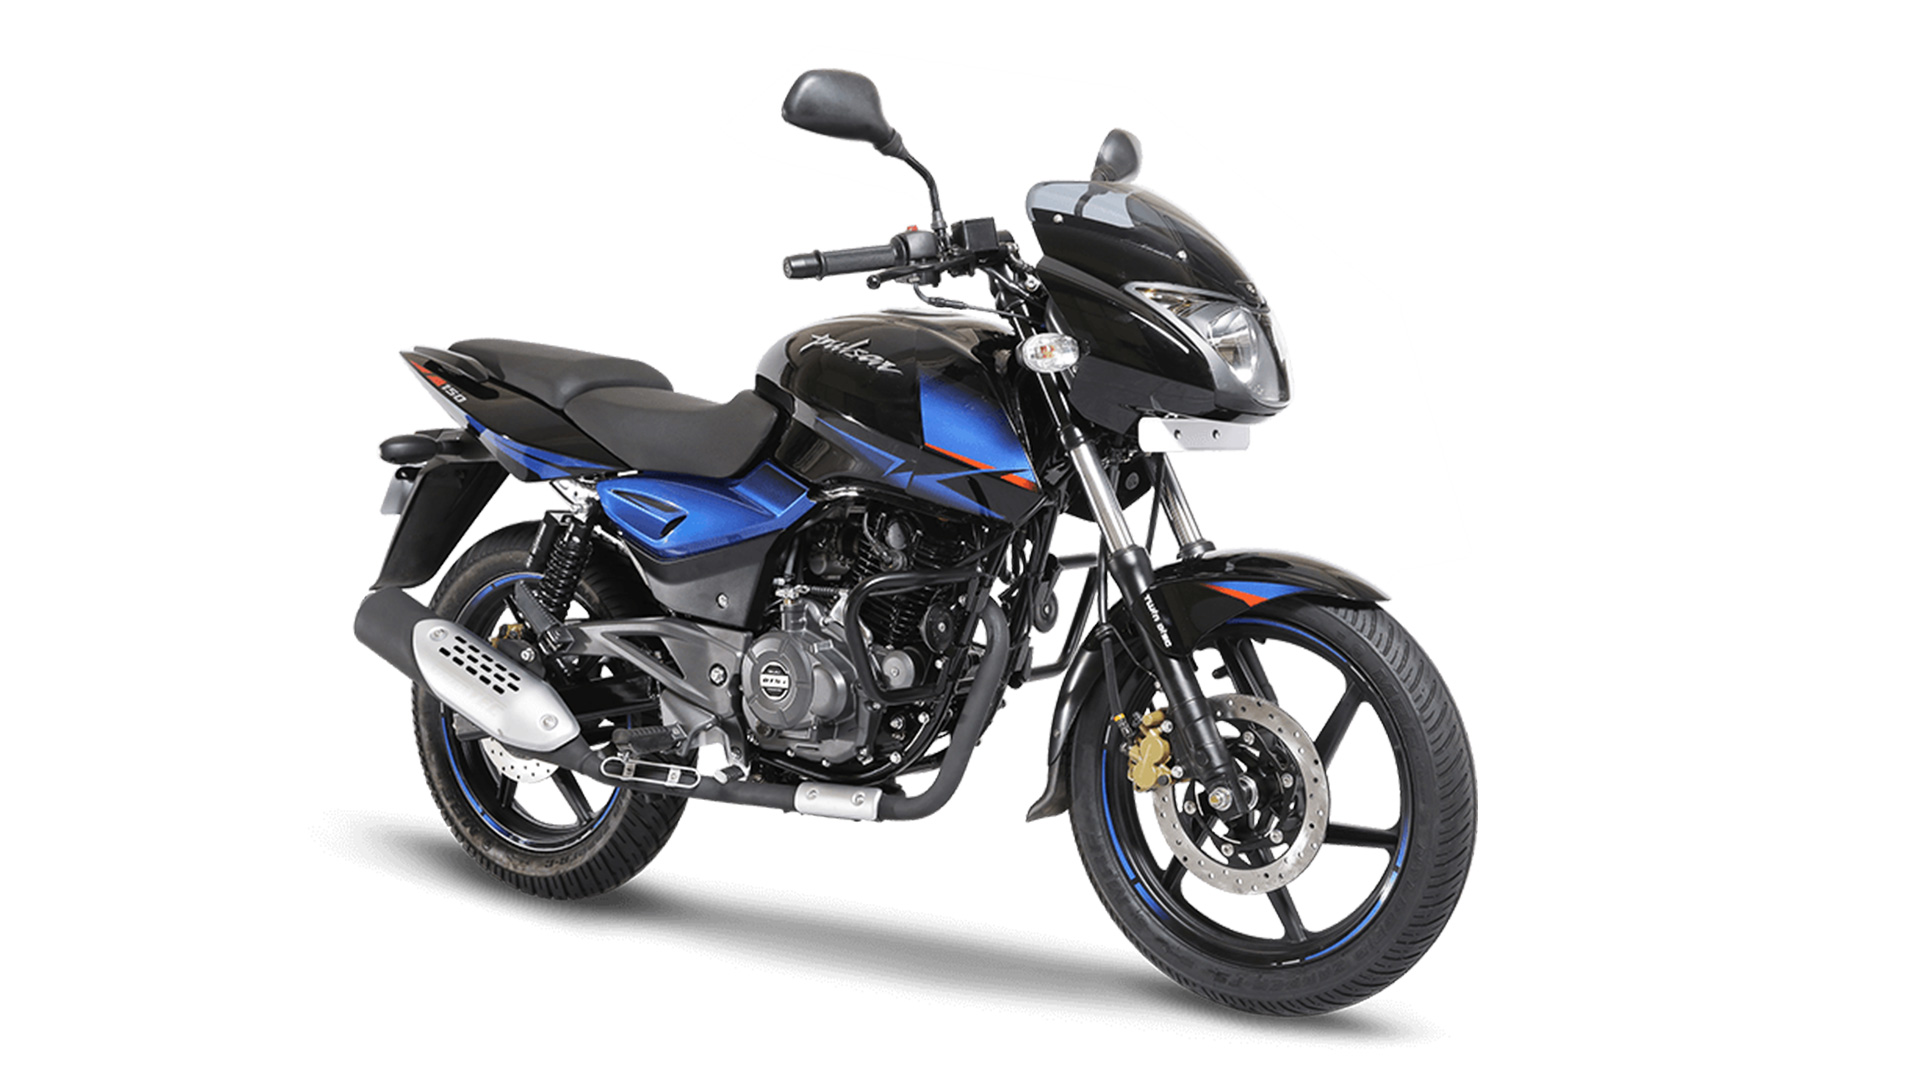 Bajaj Pulsar 150 Bike, Mileage, Engine, Price, Safety and Features